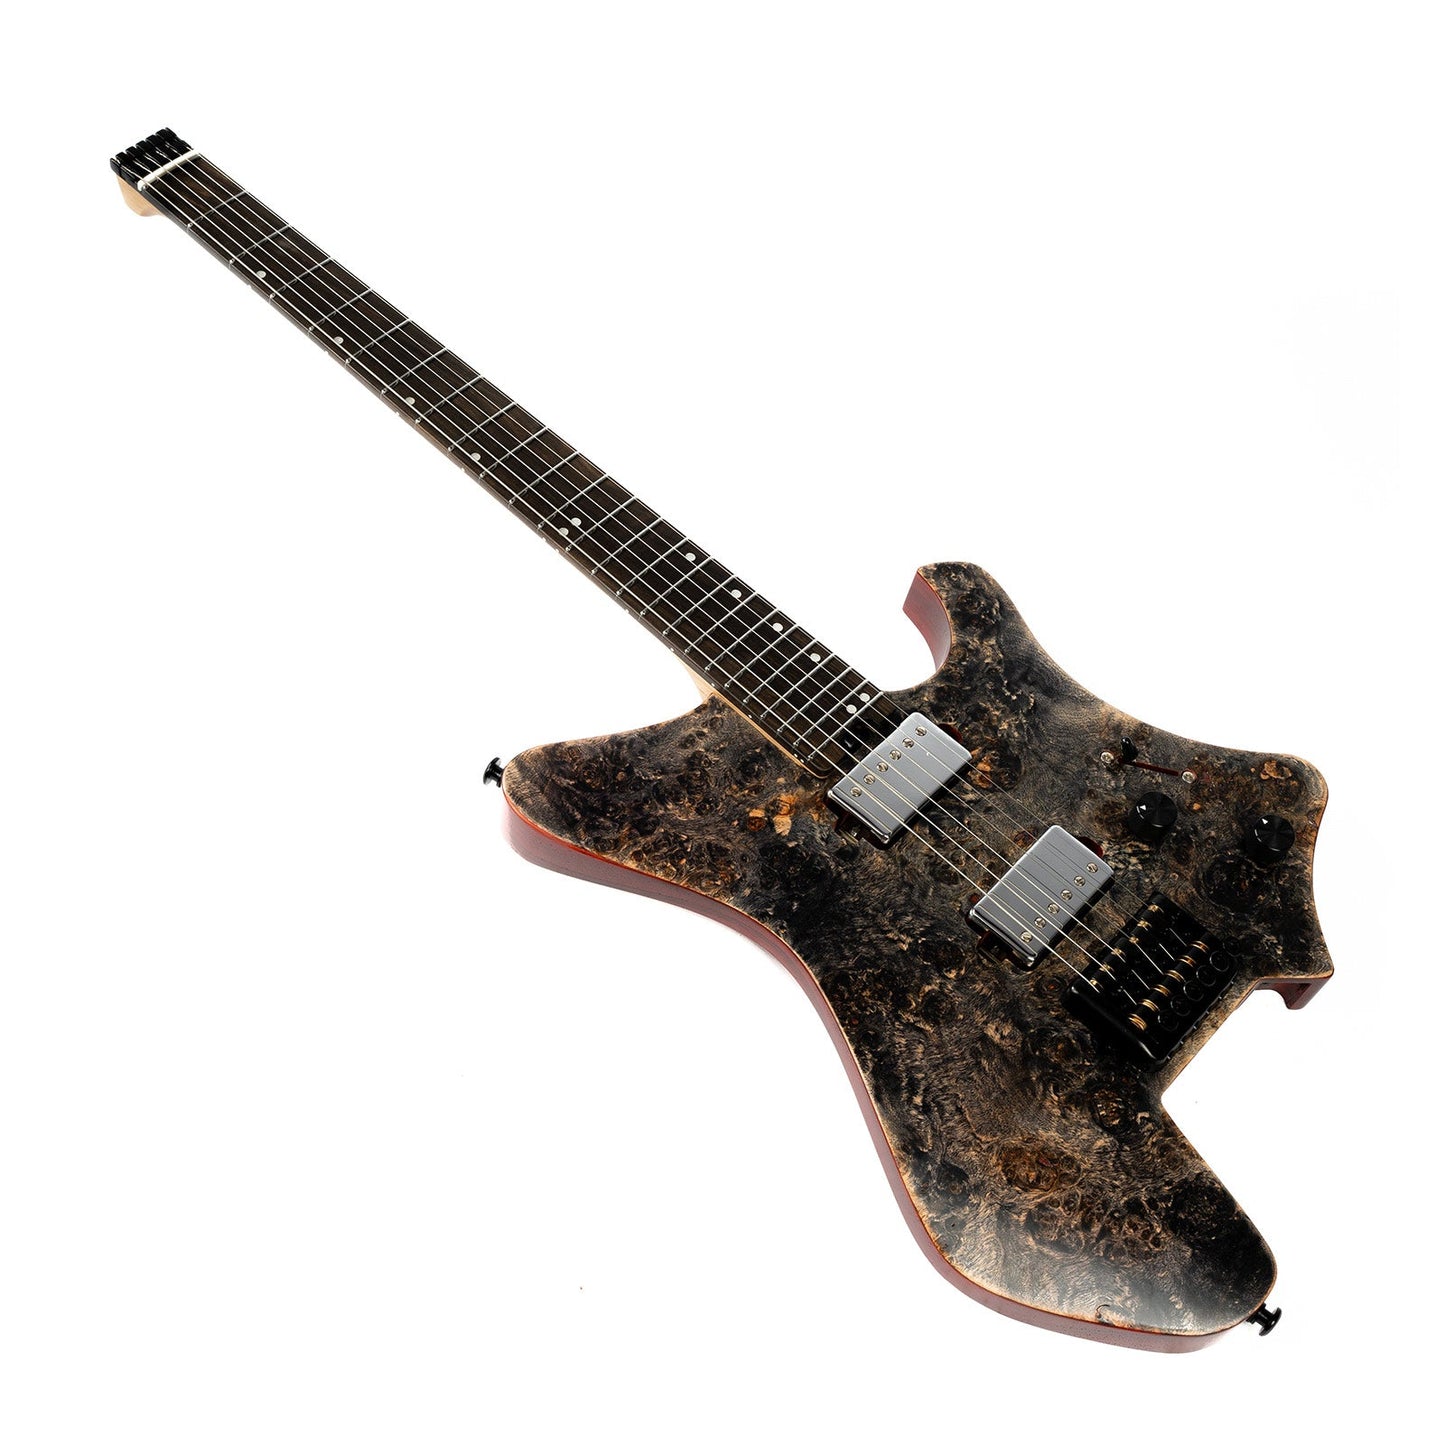 Eart Guitars, GW2 Headless Solid Body Electric Guitar, Right Handed, Compound U To C Shape Neck, Black